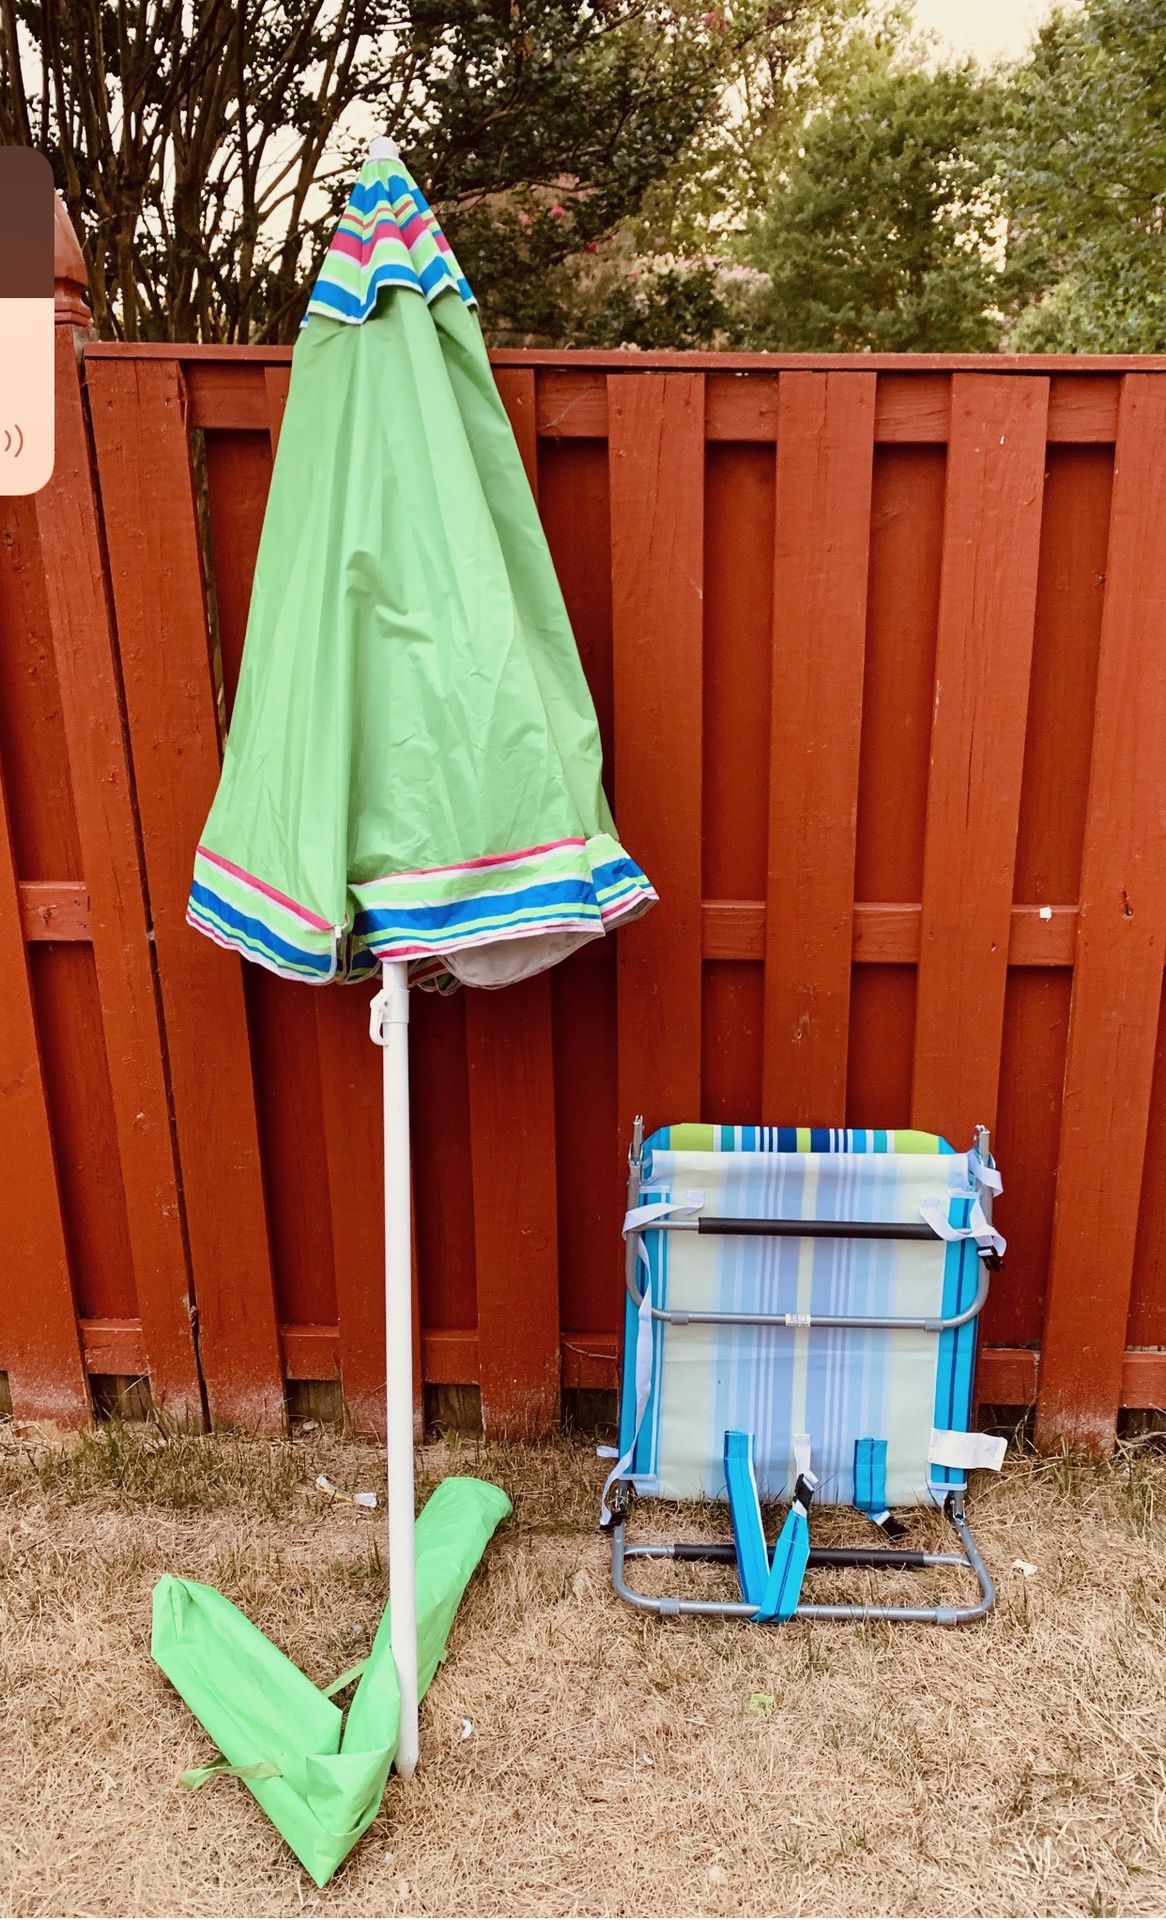 Brand new! Never used. Beach Portable Folding Backpack Beach Lounge with two umbrellas, one full seized and second one is Medium.